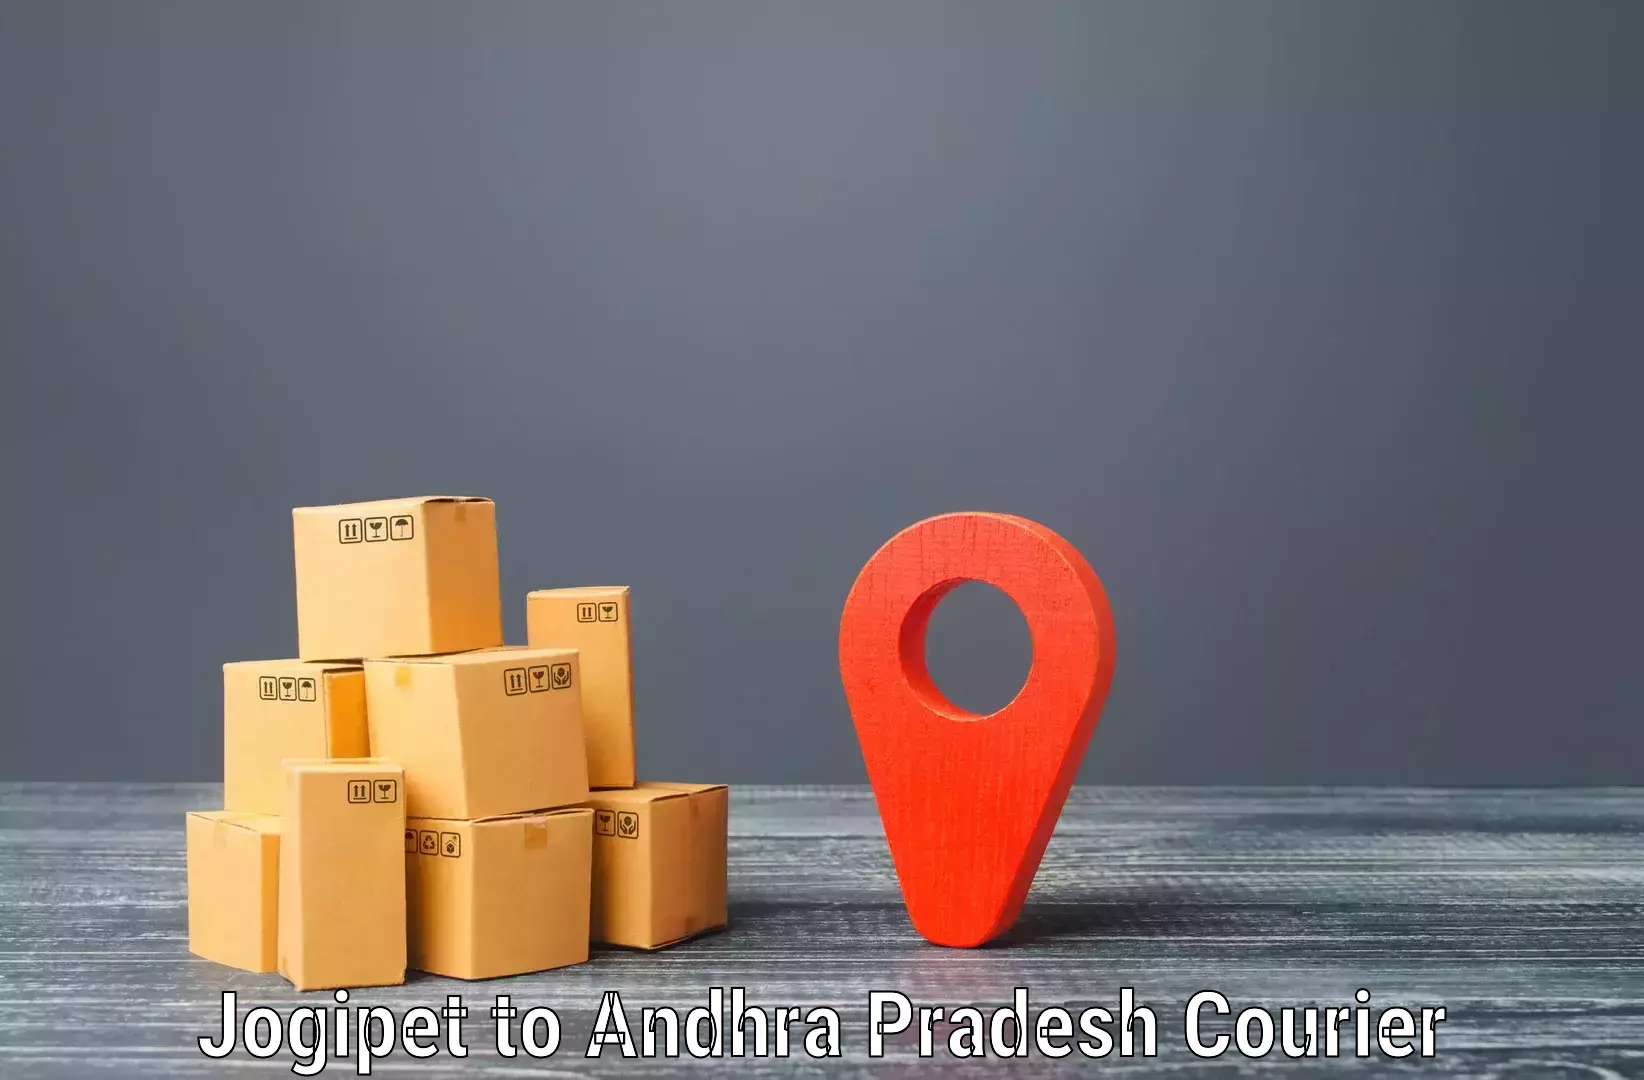 State-of-the-art courier technology Jogipet to Adoni